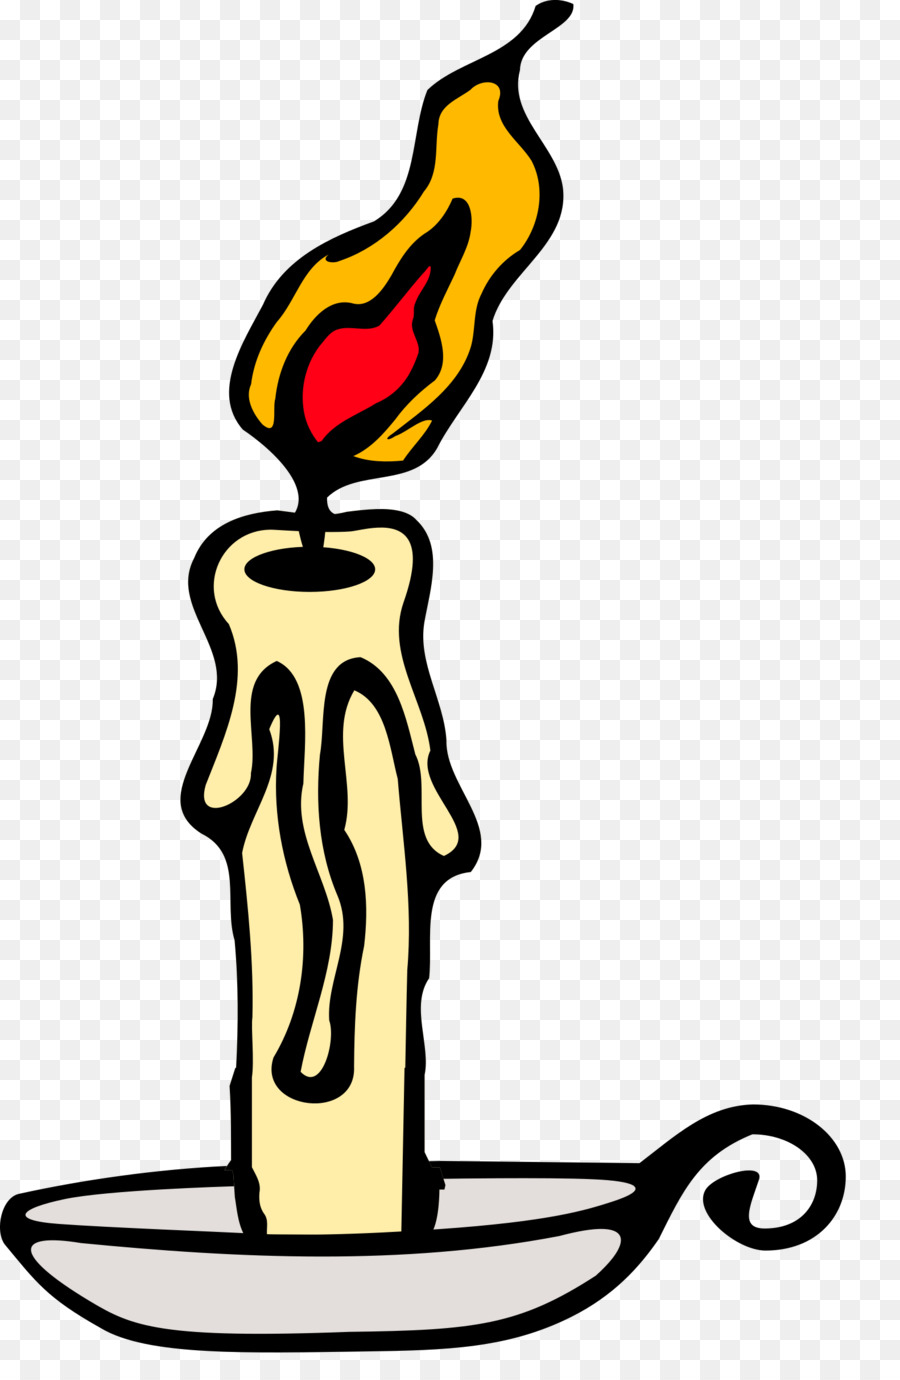 Candles clipart line art. Candlestick candle clip 